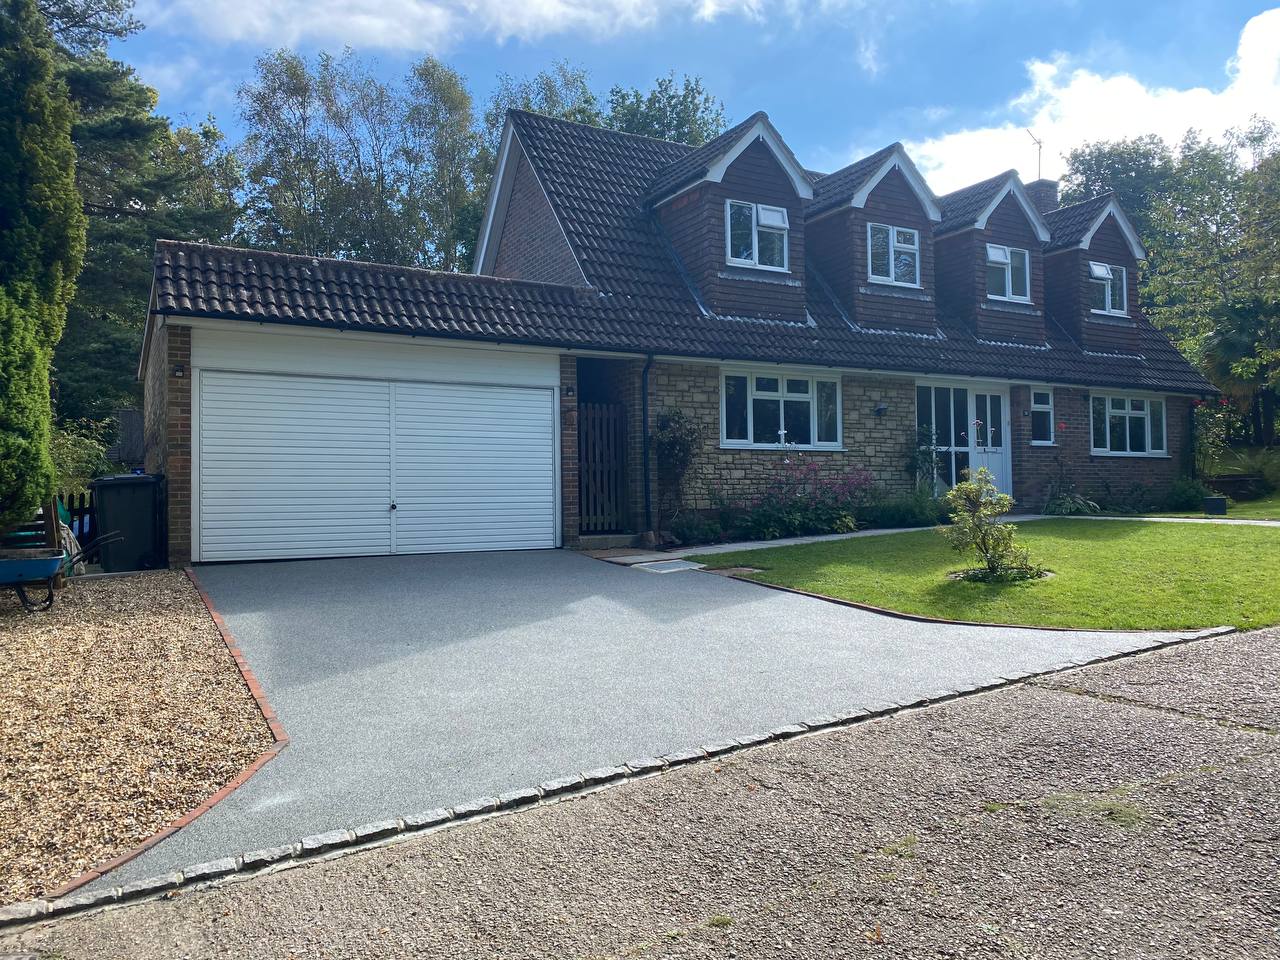 This is a photo of a Resin driveway carried out in Preston. All works done by Preston Resin Driveways